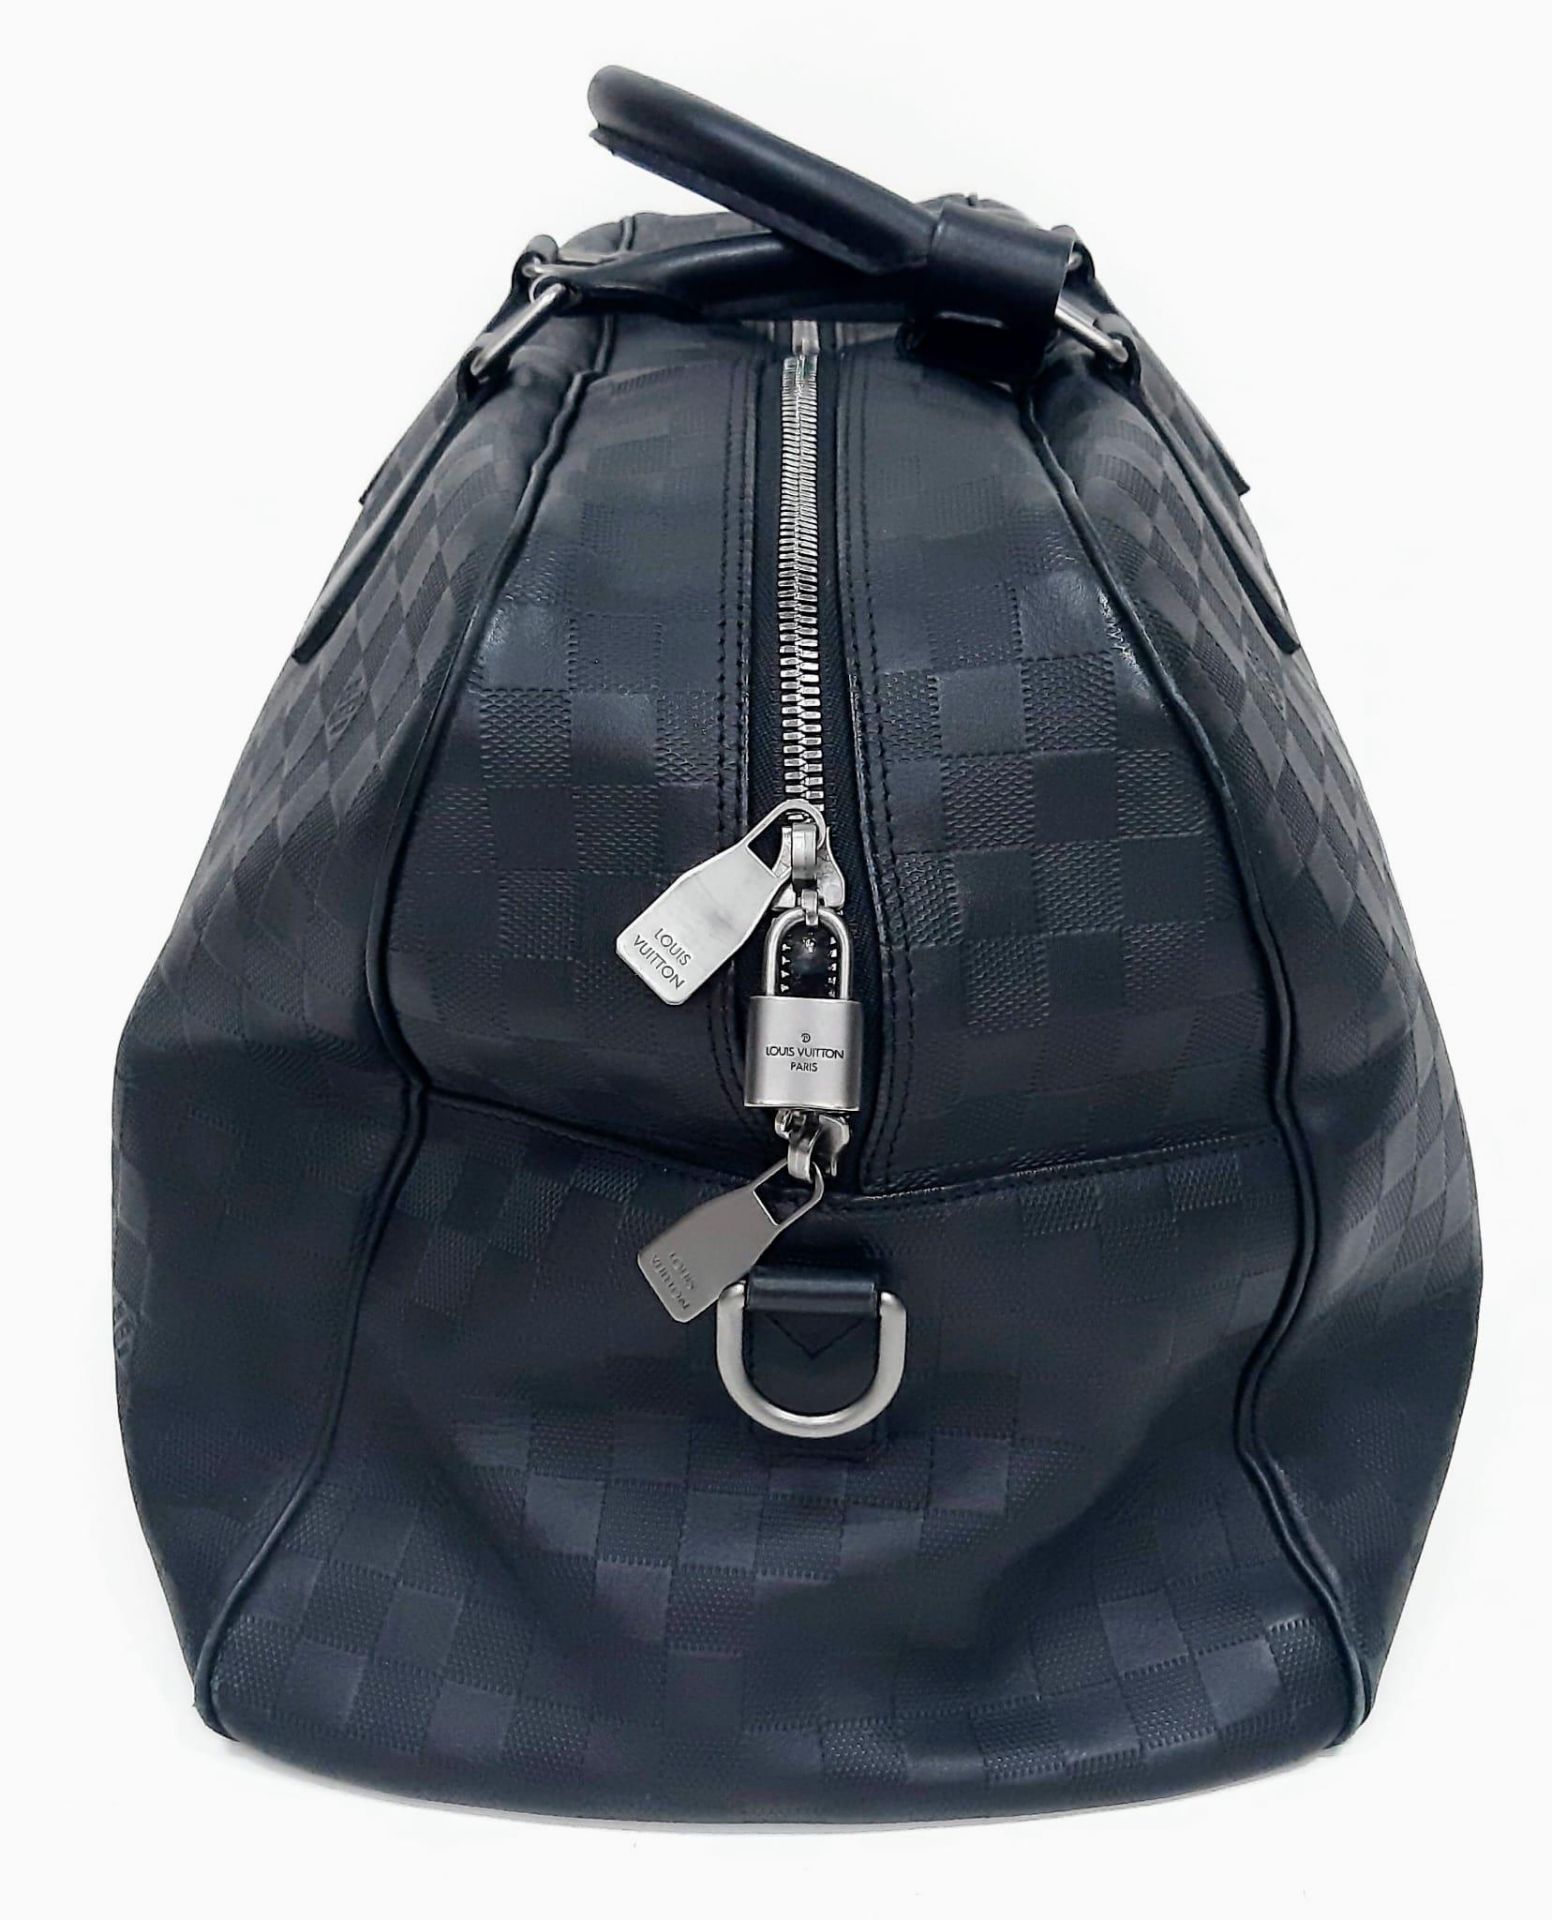 Louis Vuitton Keepall Luggage Bag. Black leather exterior with Silver toned hardware and typical - Image 3 of 8